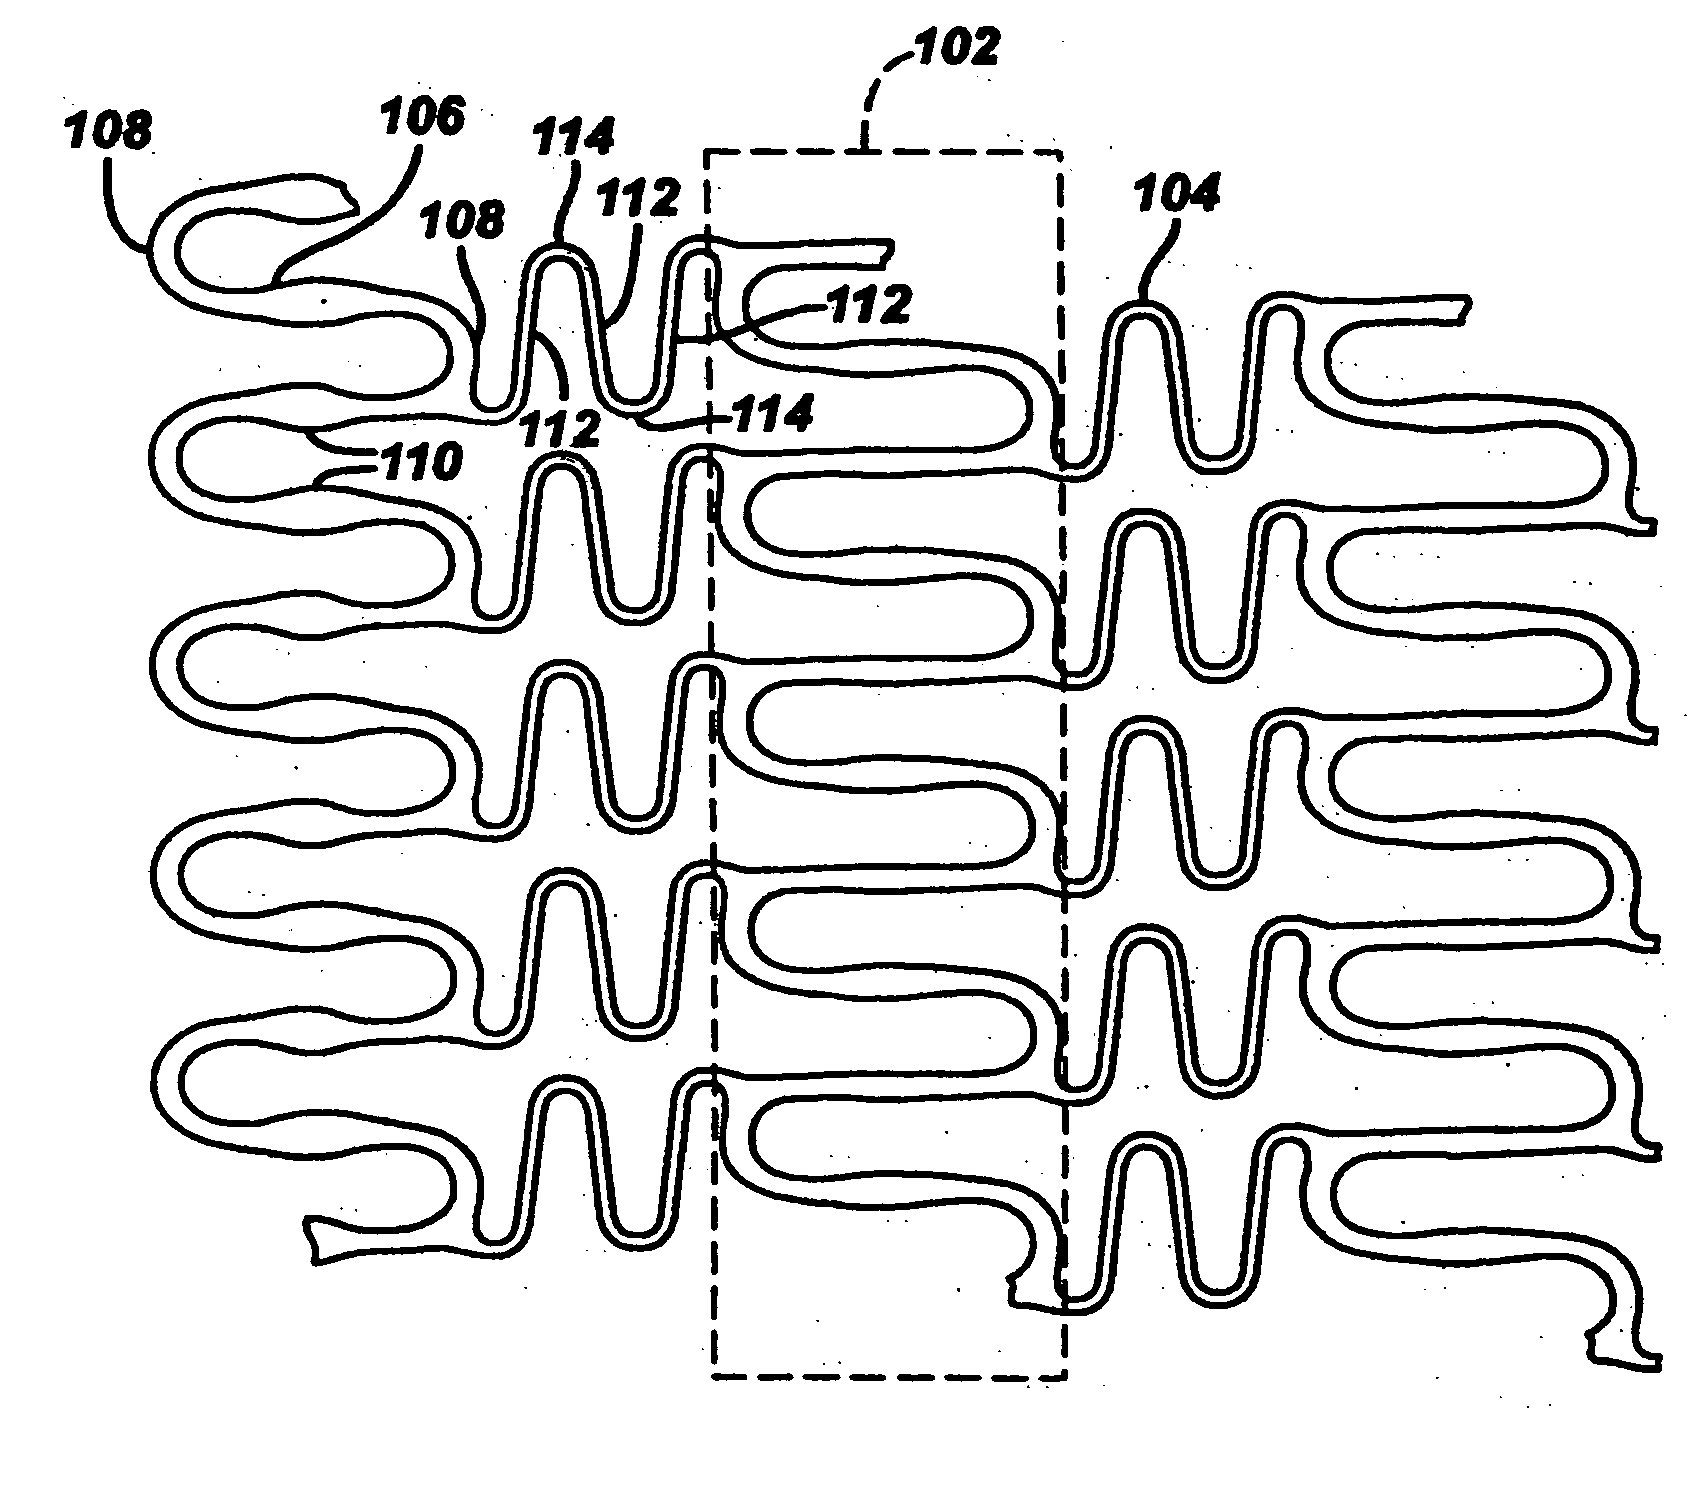 Polymeric stent having modified molecular structures in selected regions of the hoops